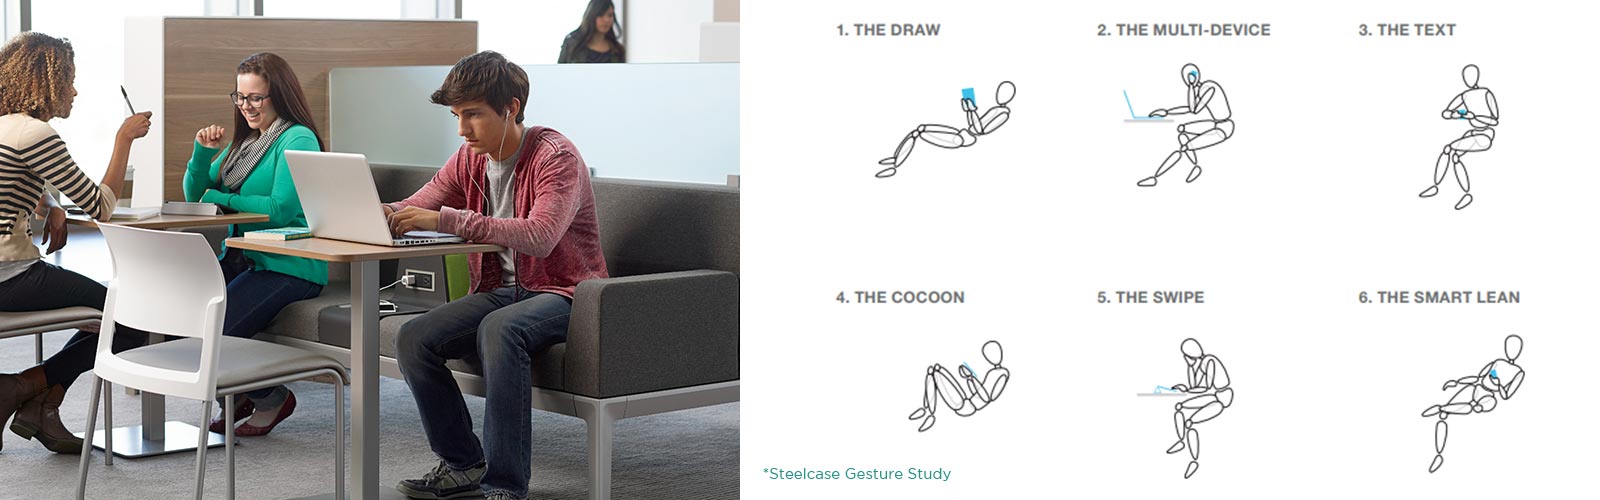 Steelcase Global Posture stidy new postures which informed the design of the Gesture chair